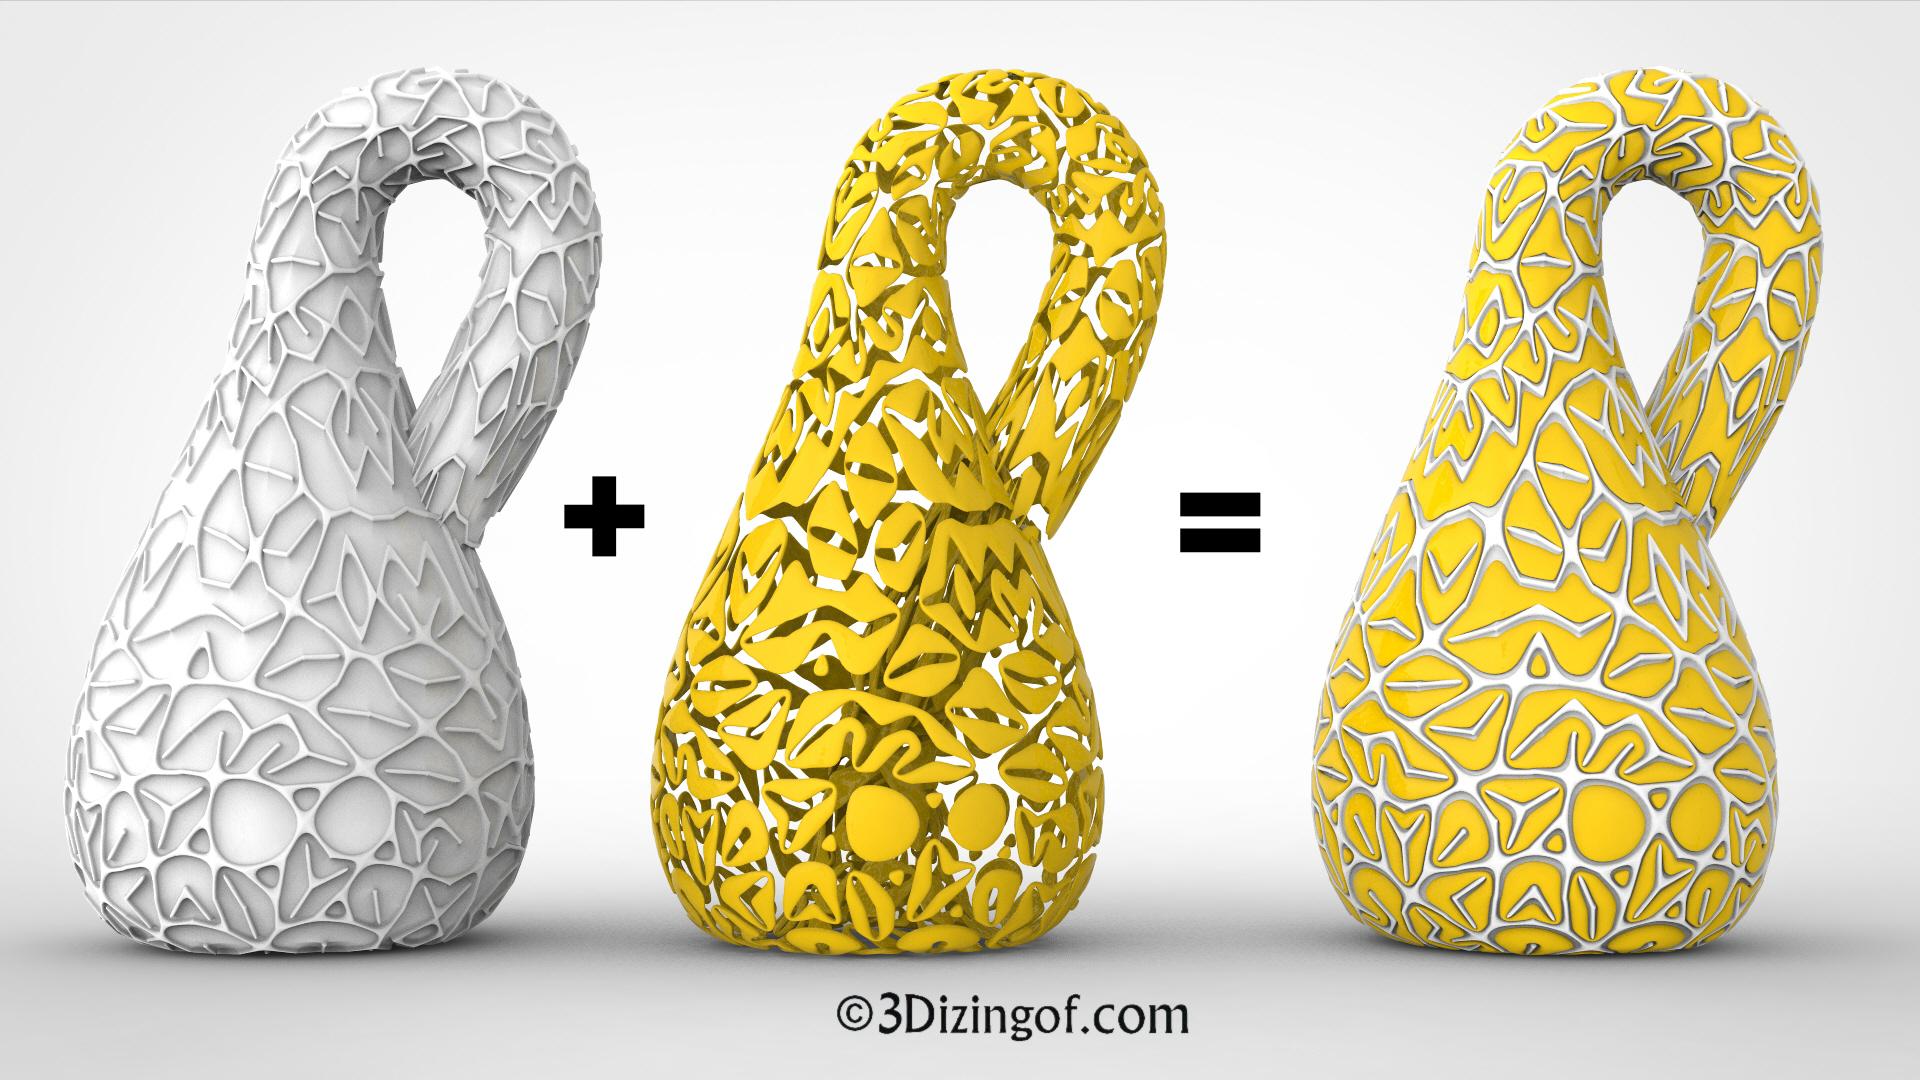 Dizingof's Random Infinite Pattern and Klein Bottle Highlight Printing's Creative Explosion - 3DPrint.com | Voice of 3D Printing / Additive Manufacturing